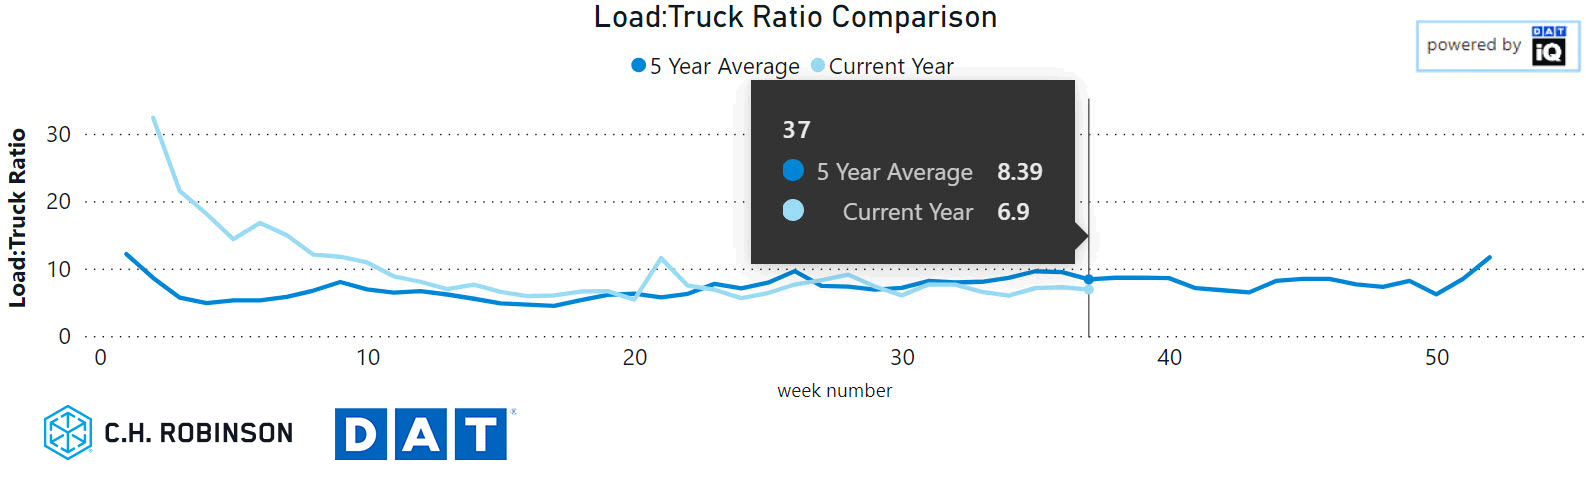 reefer load:truck ratio 5 year comparrison